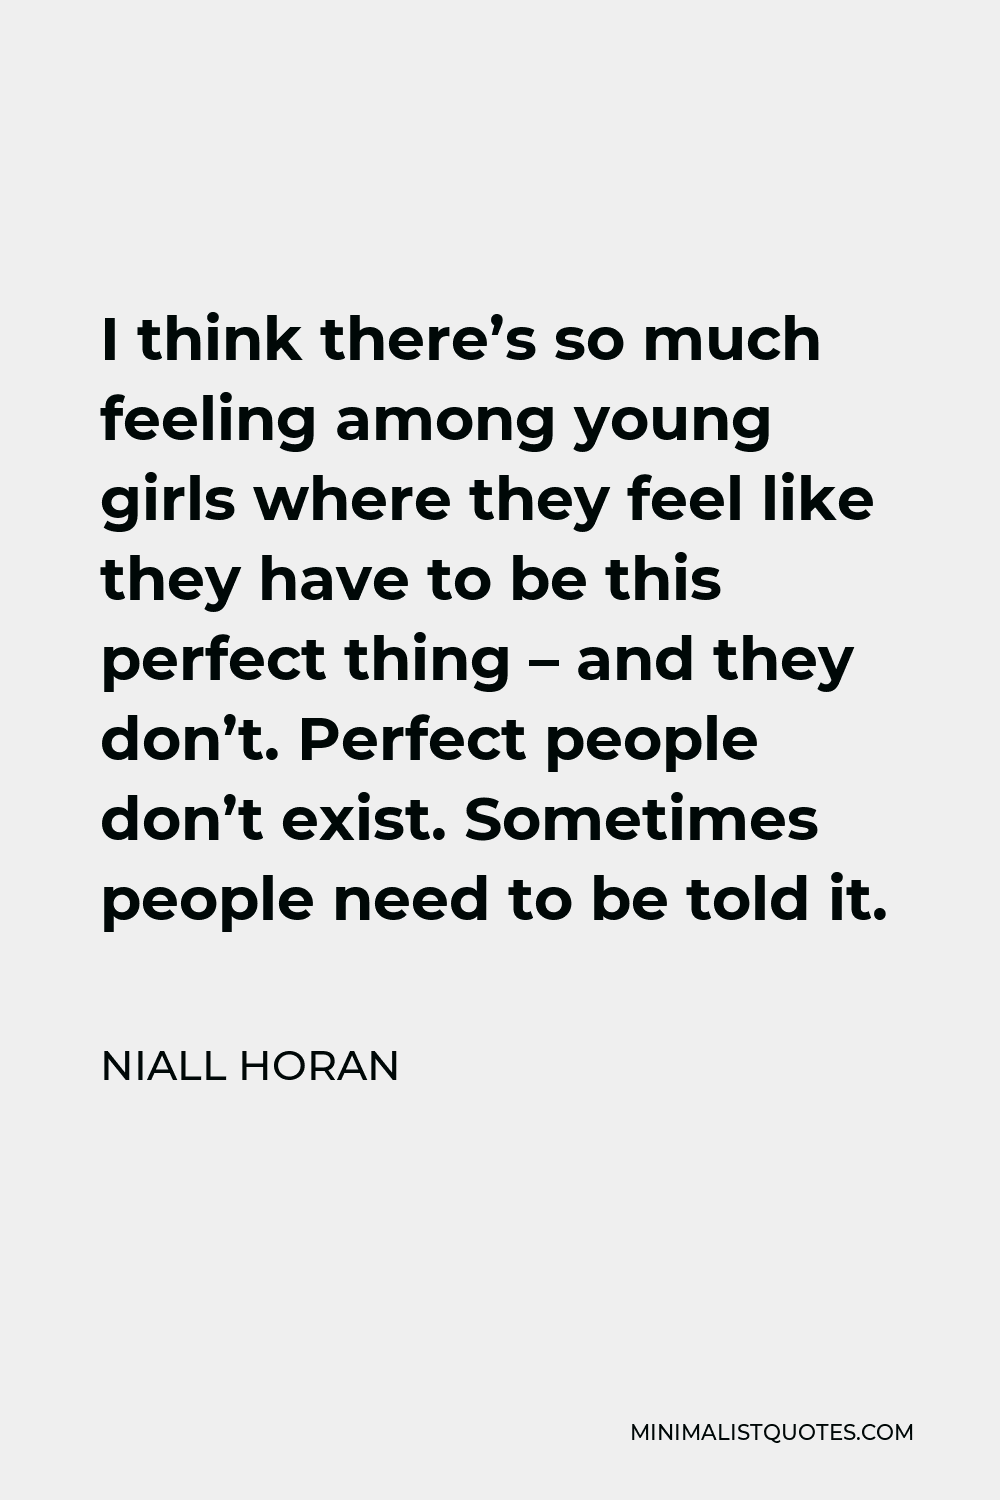 Niall Horan Quote - I think there’s so much feeling among young girls where they feel like they have to be this perfect thing – and they don’t. Perfect people don’t exist. Sometimes people need to be told it.